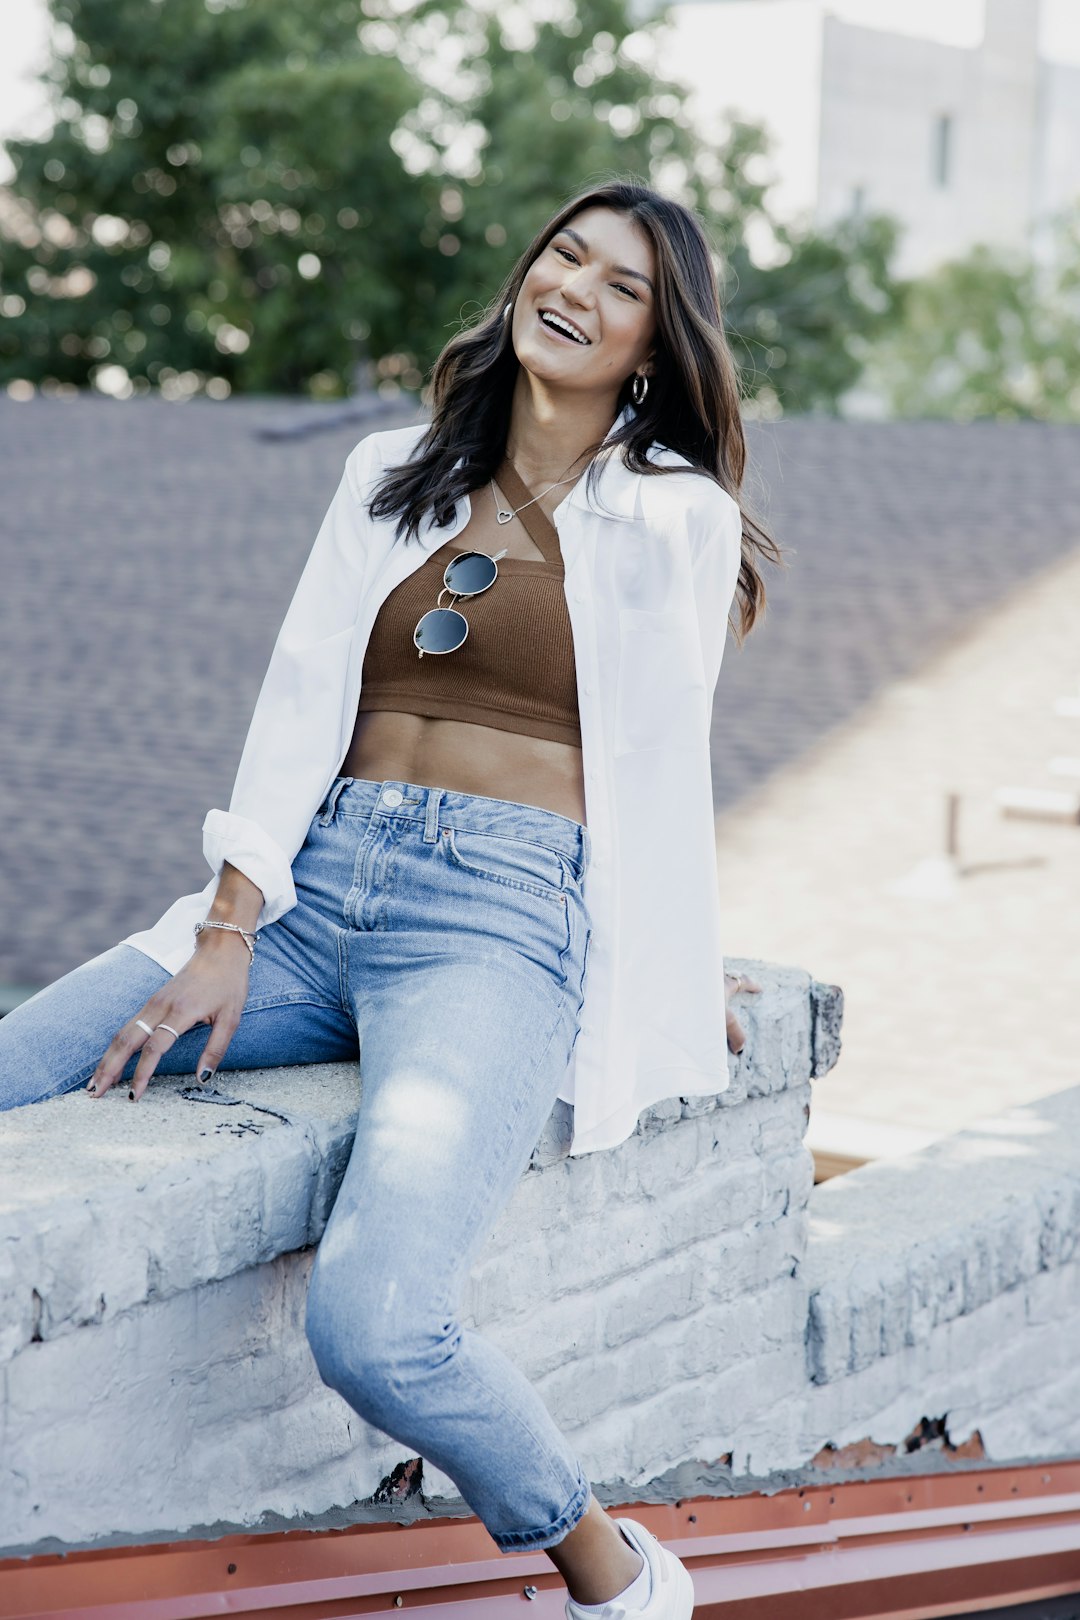 woman in white long sleeve shirt and blue denim jeans sitting on concrete bench during daytime